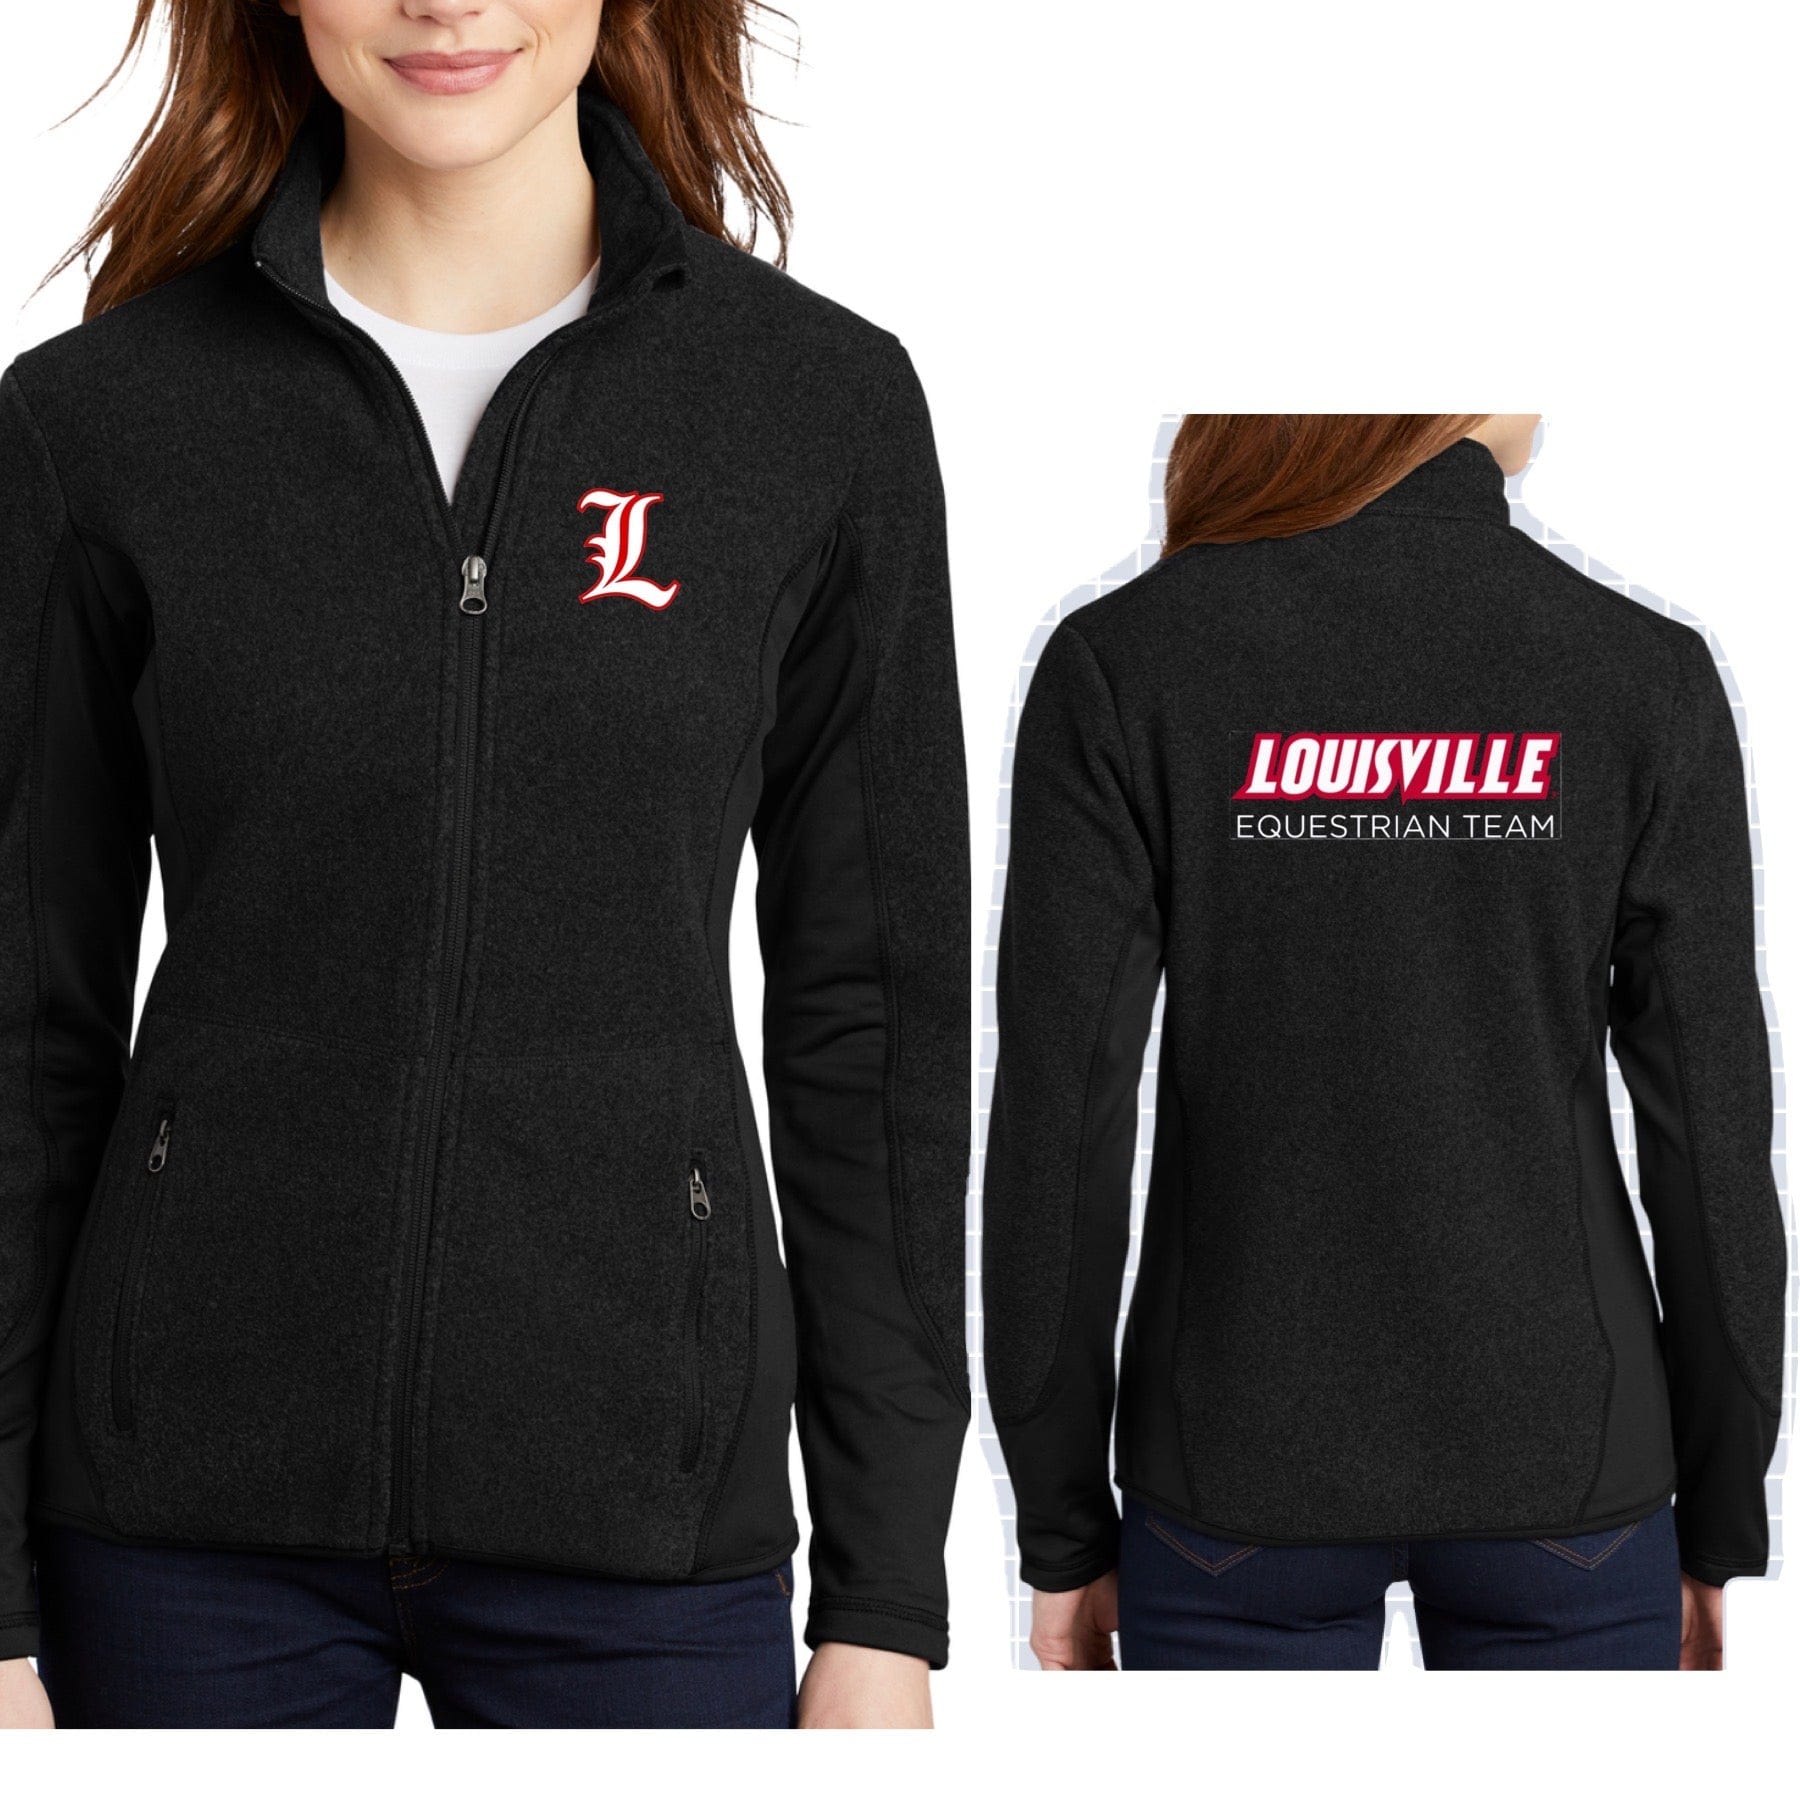 Equestrian Team Apparel Louisville Equestrian Team Hunt Seat Pro Fleece Jacket equestrian team apparel online tack store mobile tack store custom farm apparel custom show stable clothing equestrian lifestyle horse show clothing riding clothes horses equestrian tack store